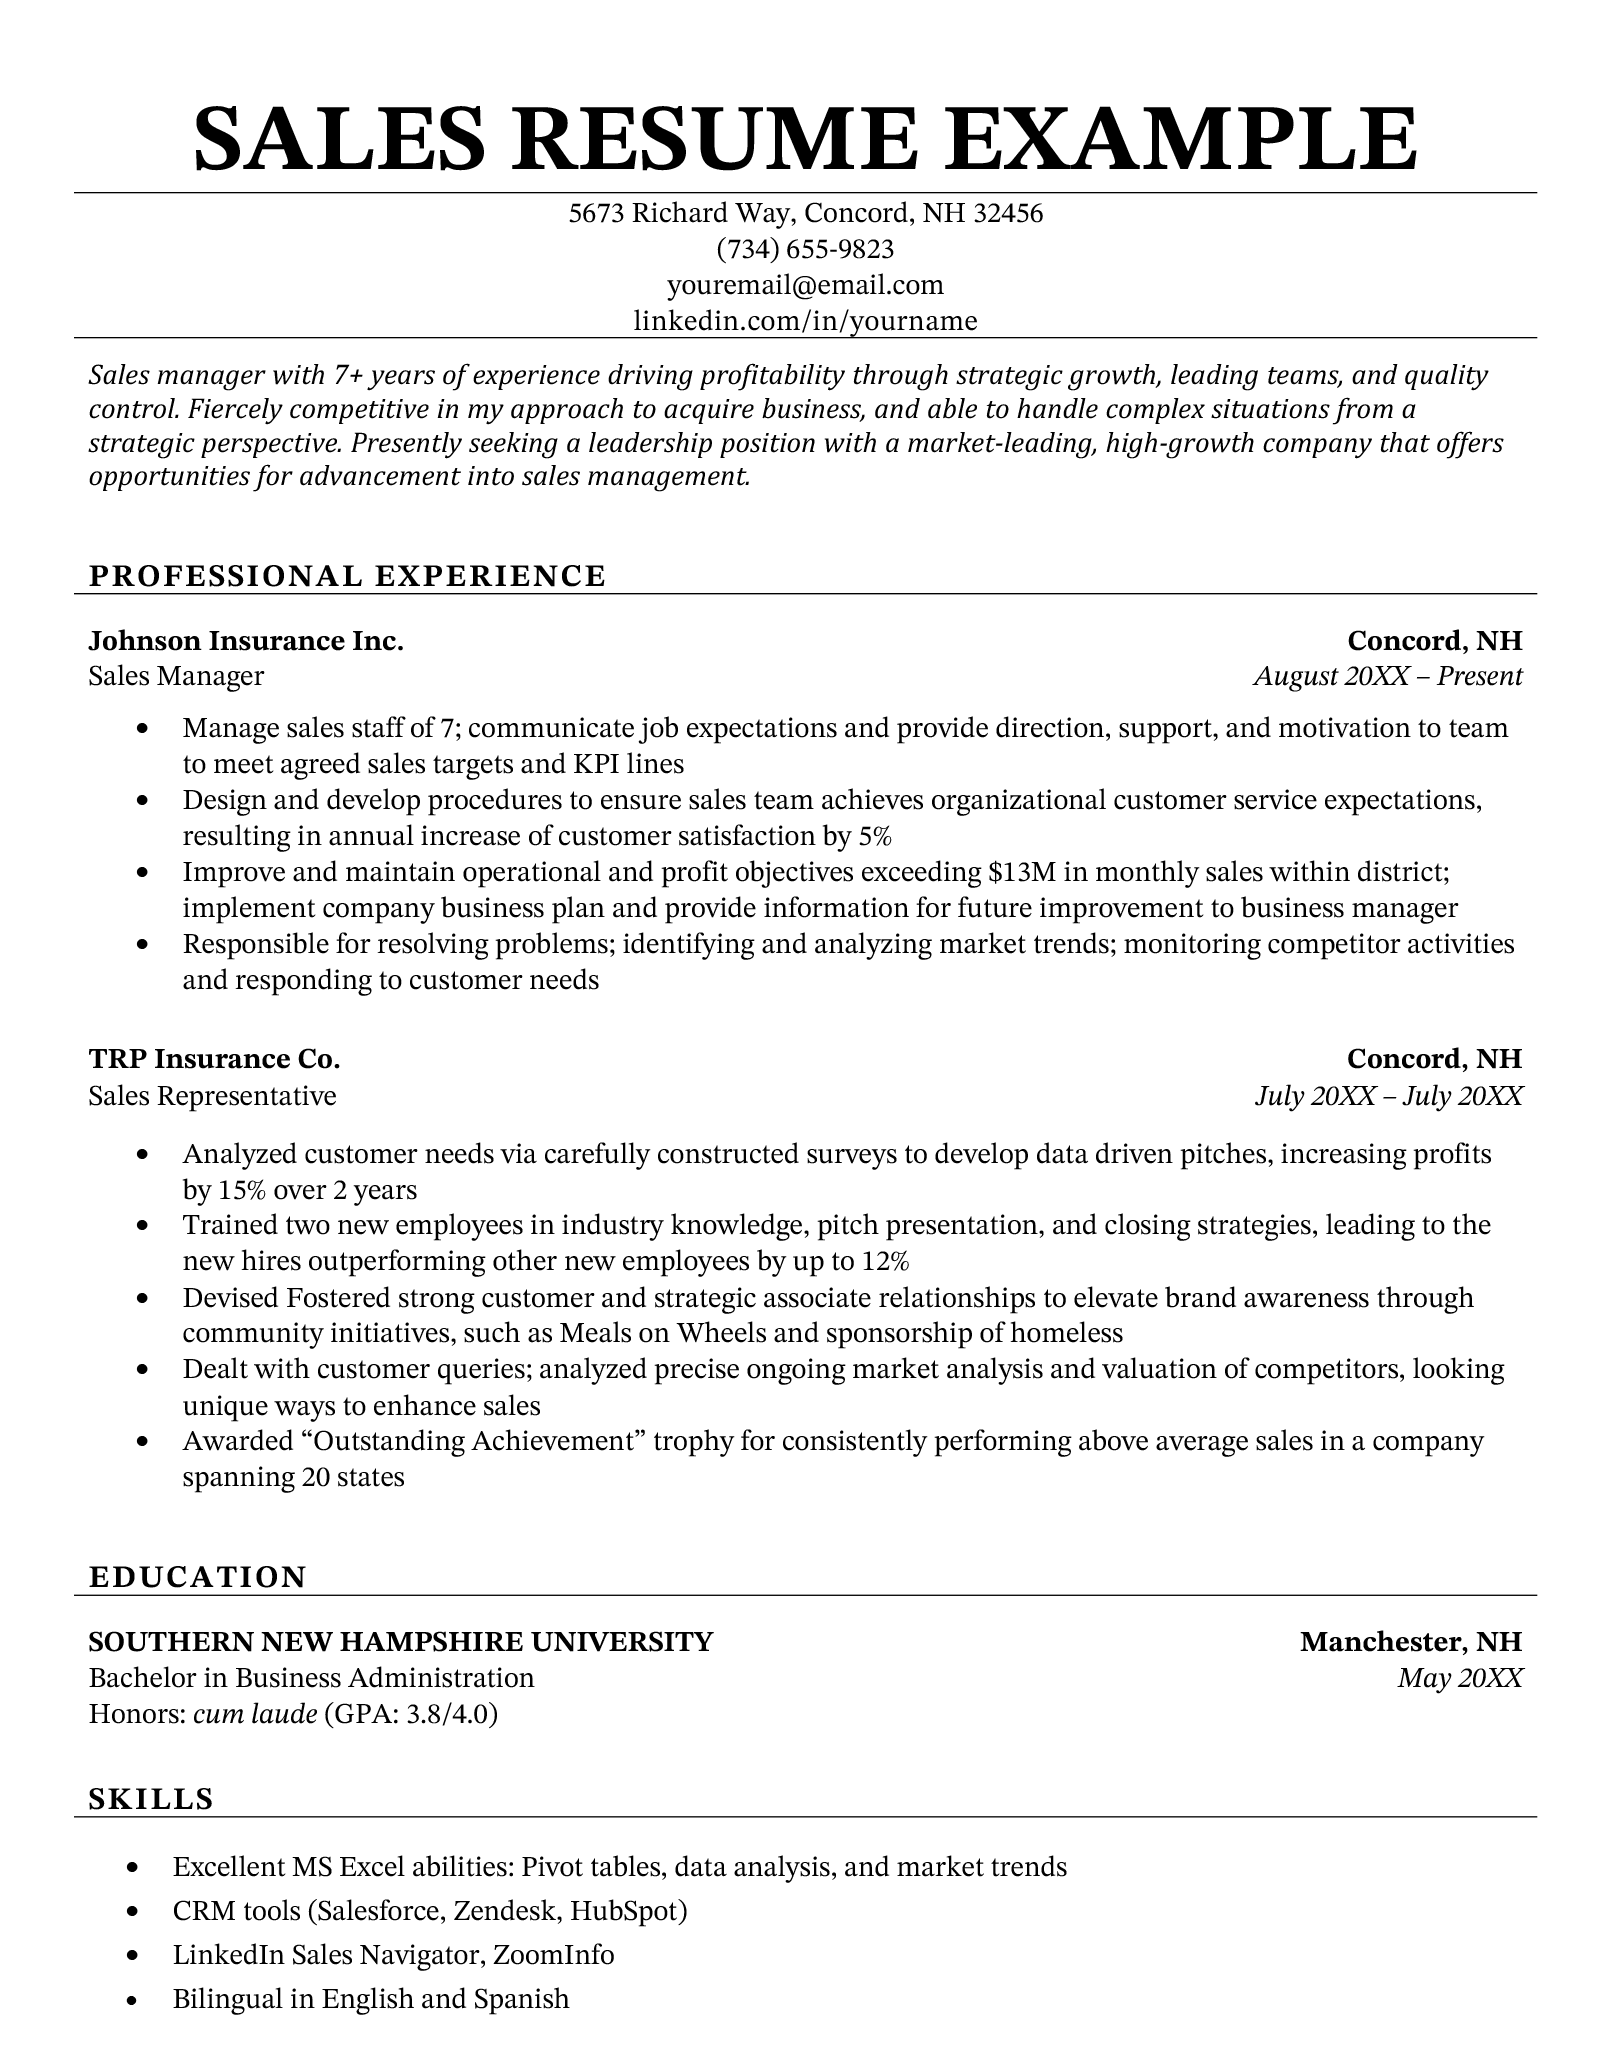 An example of a sales resume on a simple black and white template